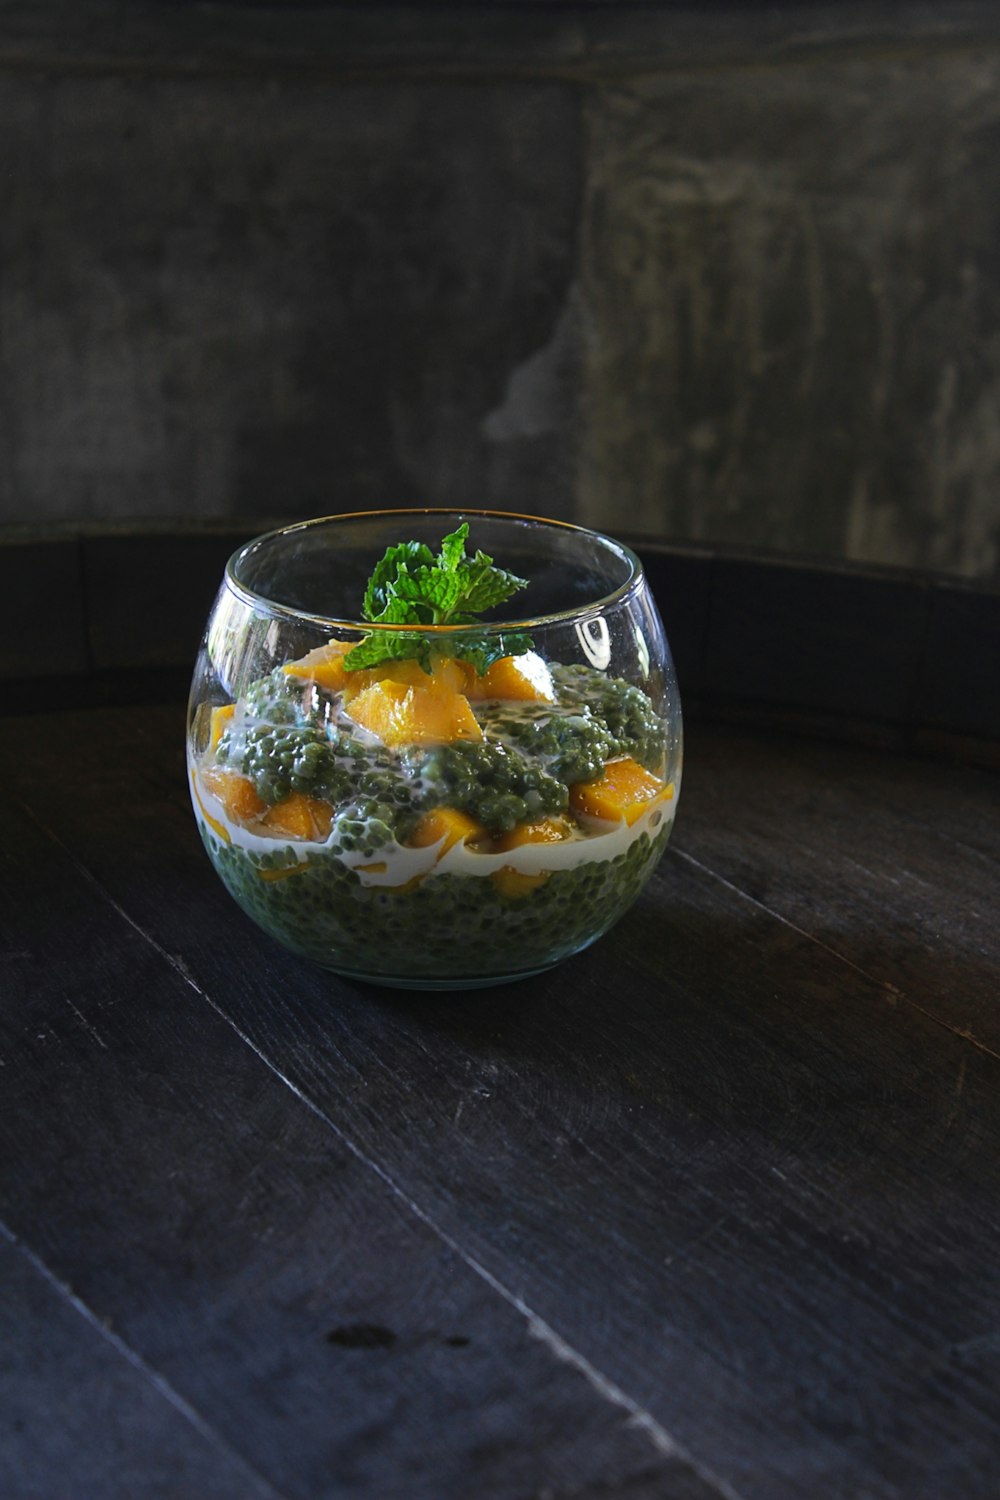 a glass bowl filled with food on top of a wooden table